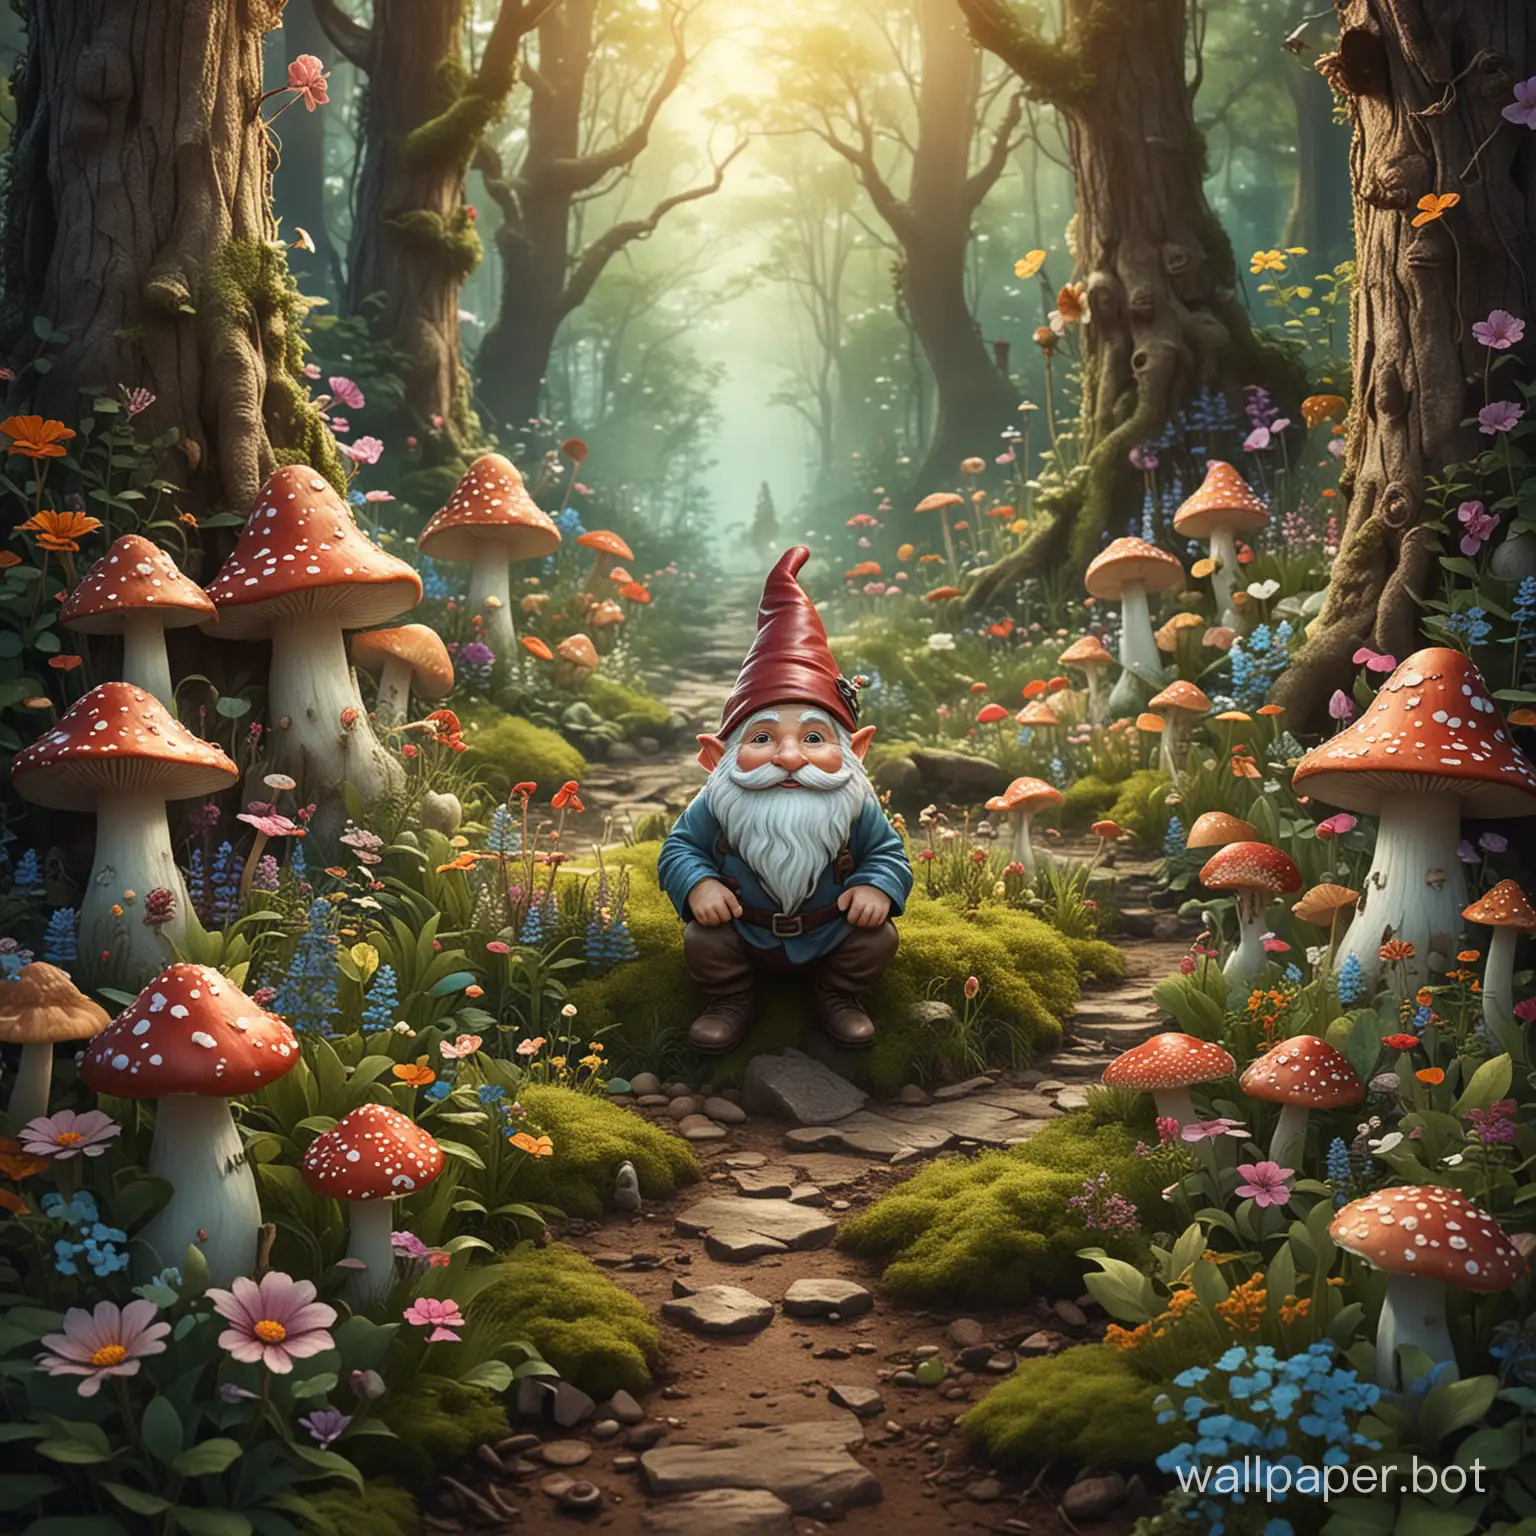 Enchanted-Fantasy-Forest-with-Gnomes-and-Floral-Mushrooms